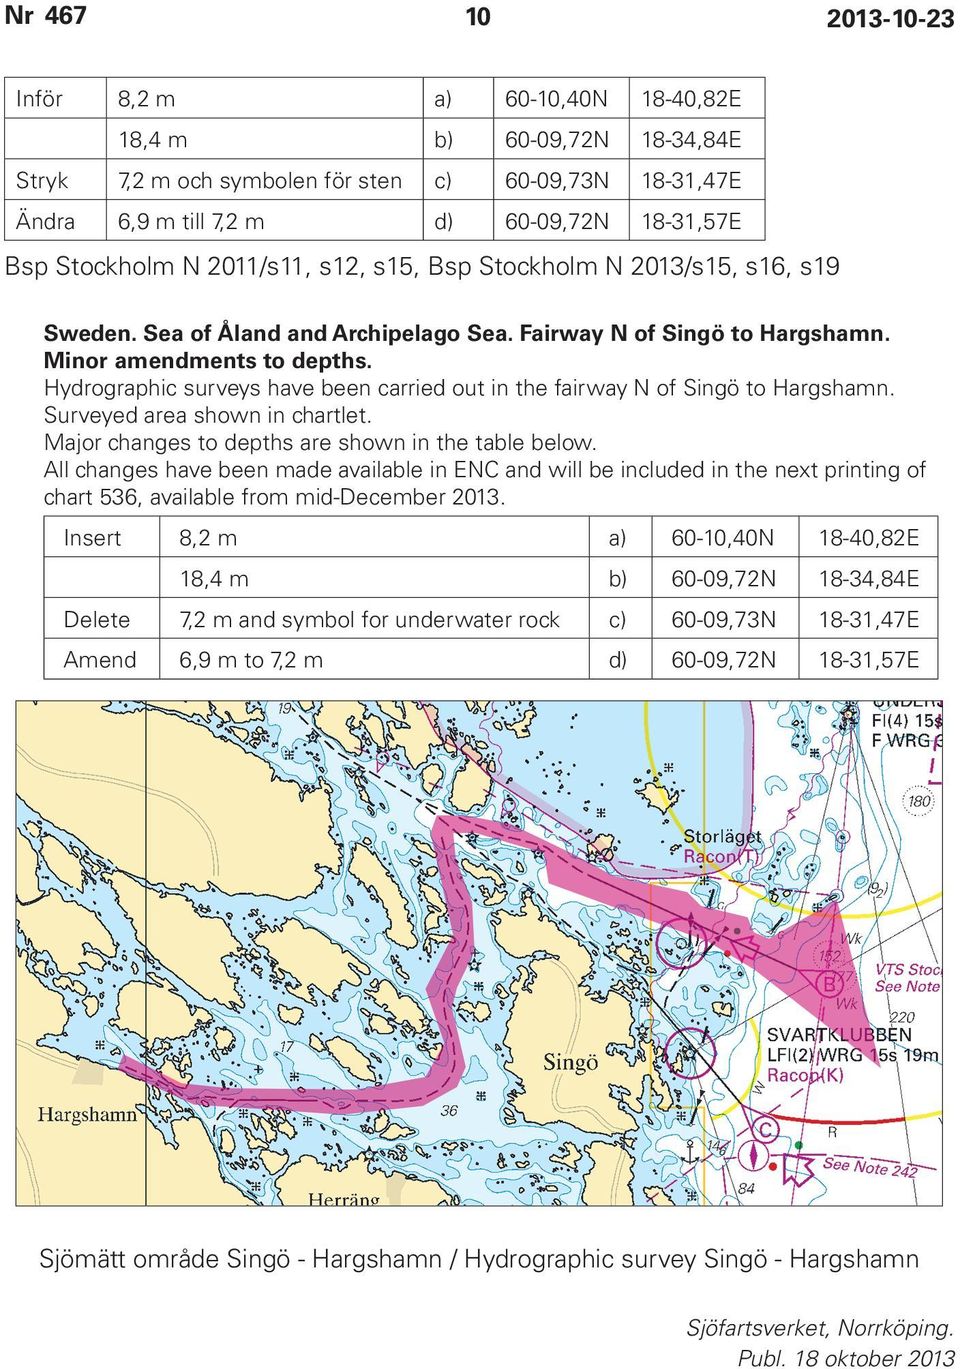 Hydrographic surveys have been carried out in the fairway N of Singö to Hargshamn. Surveyed area shown in chartlet. Major changes to depths are shown in the table below.